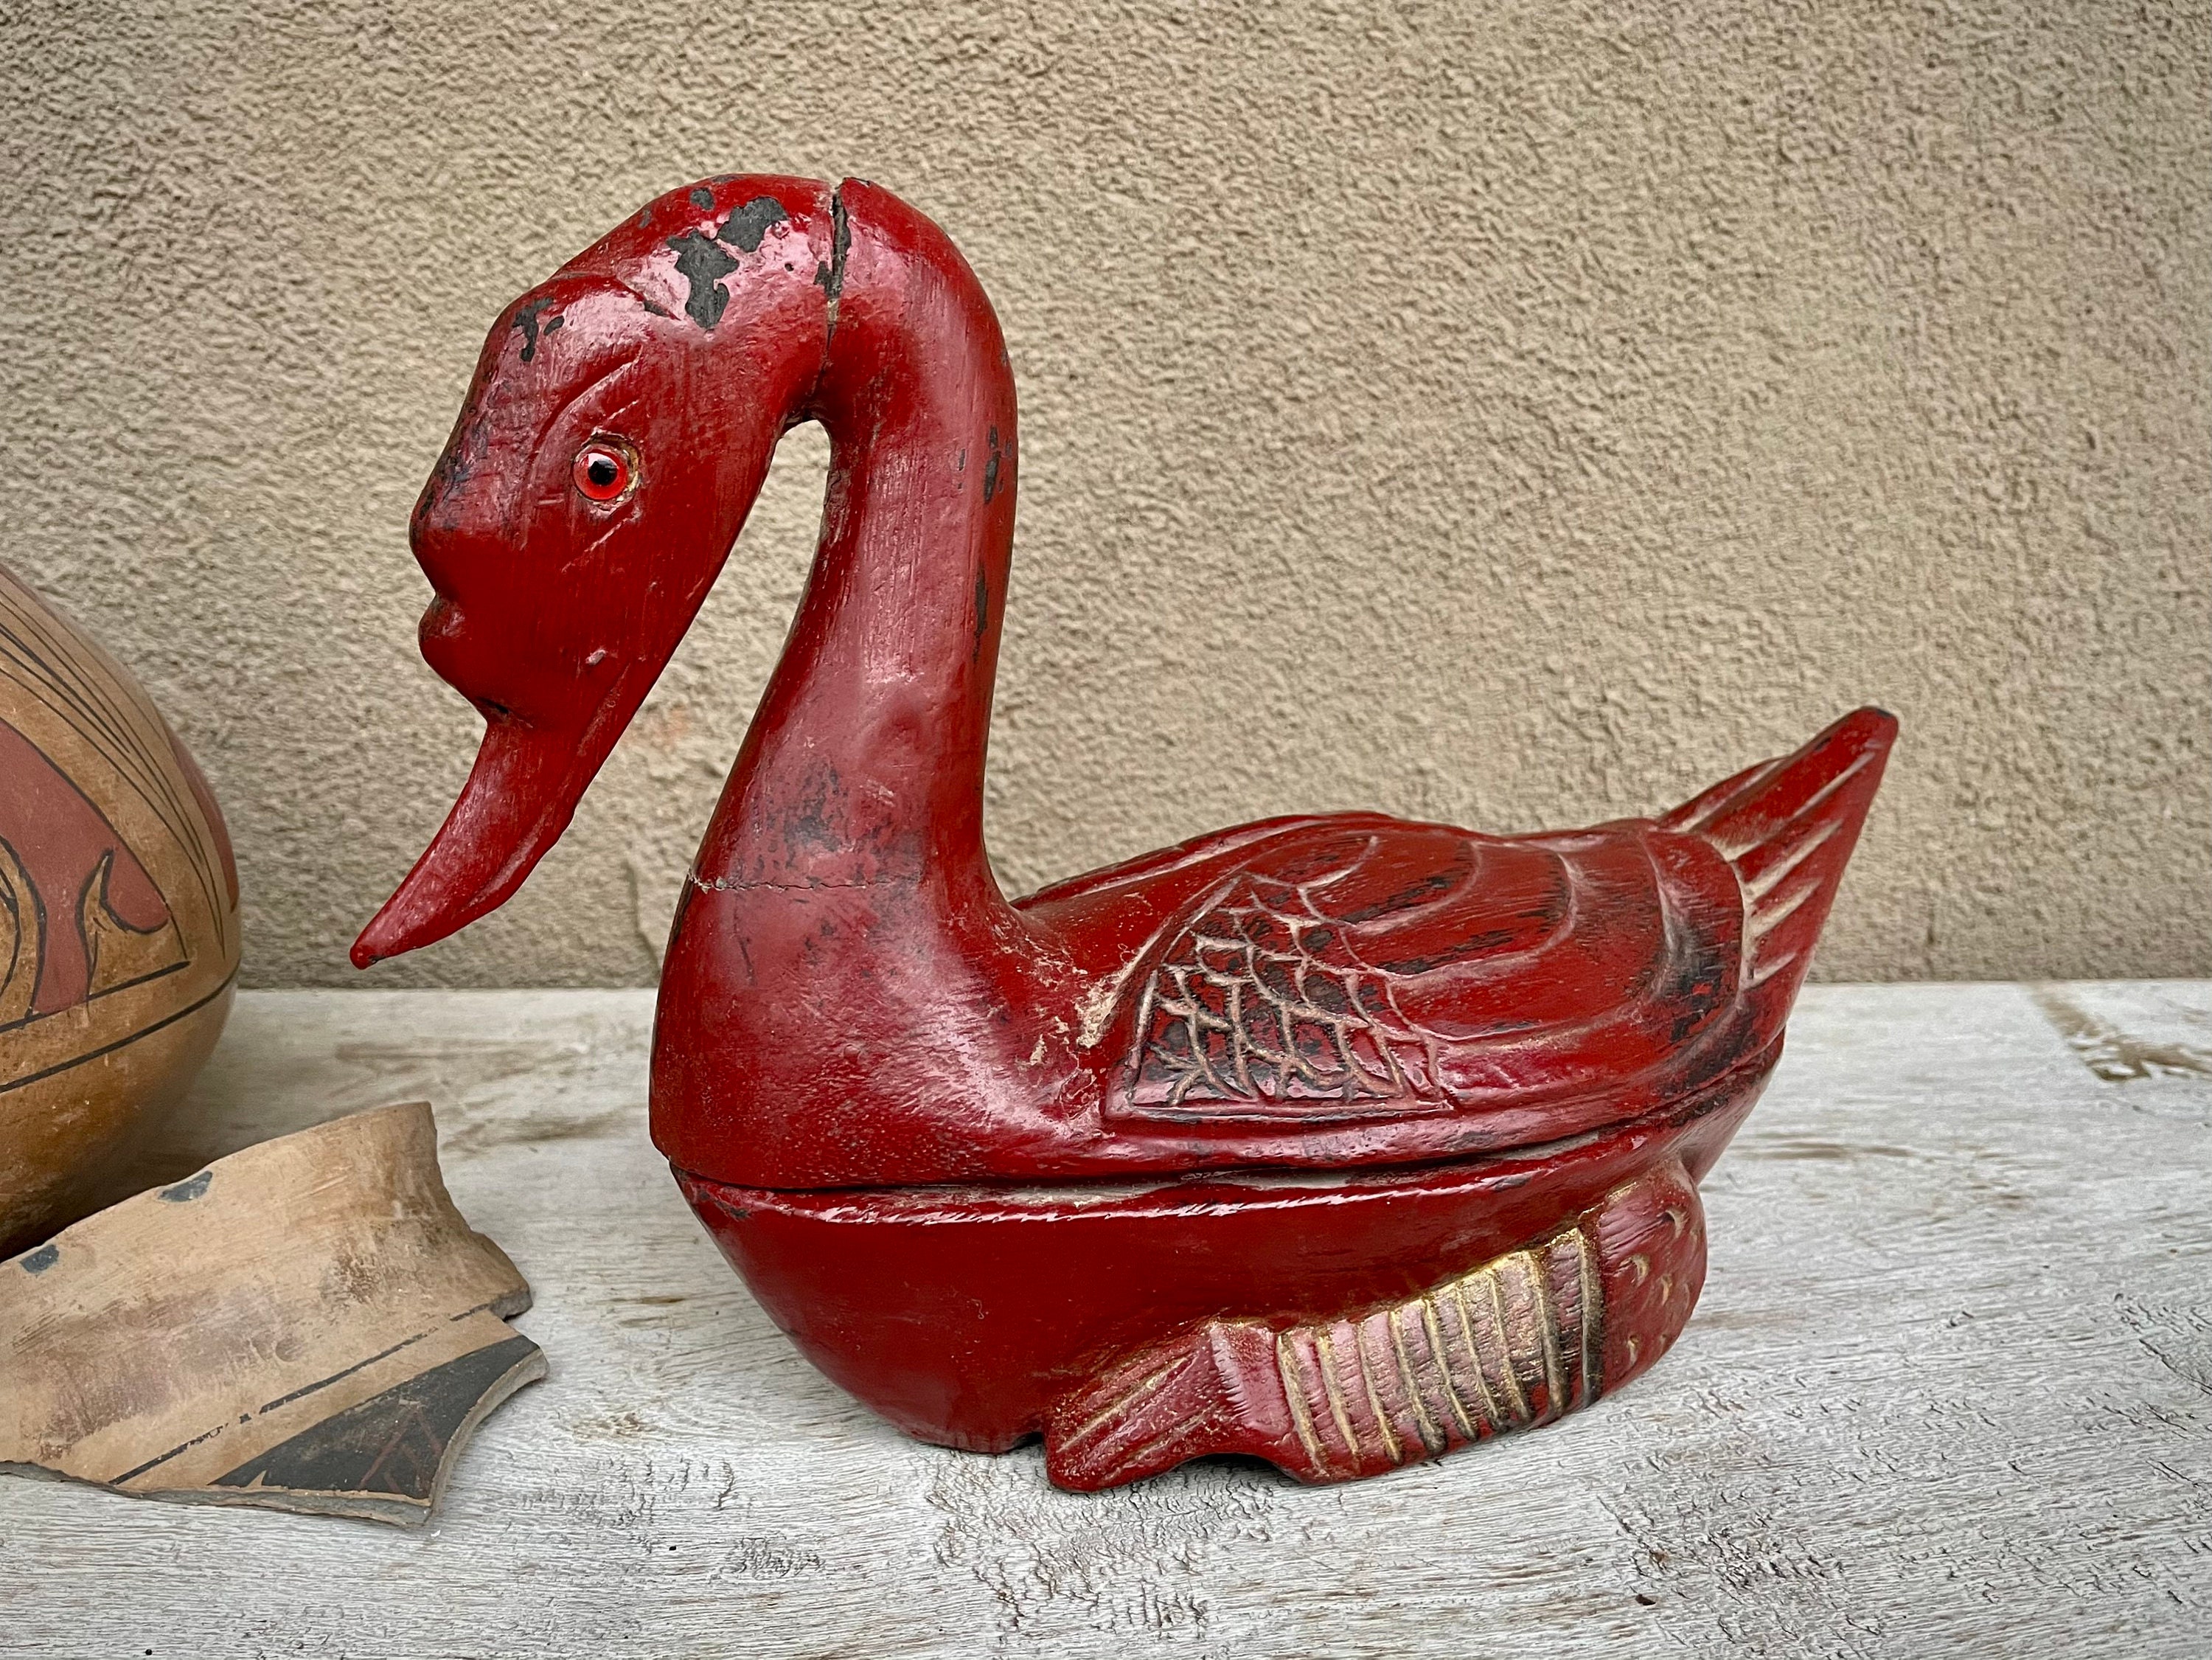 Illusion glæde pouch Antique Chinese Red Lacquered Swan Duck Shaped Wooden Box 1915 - Etsy